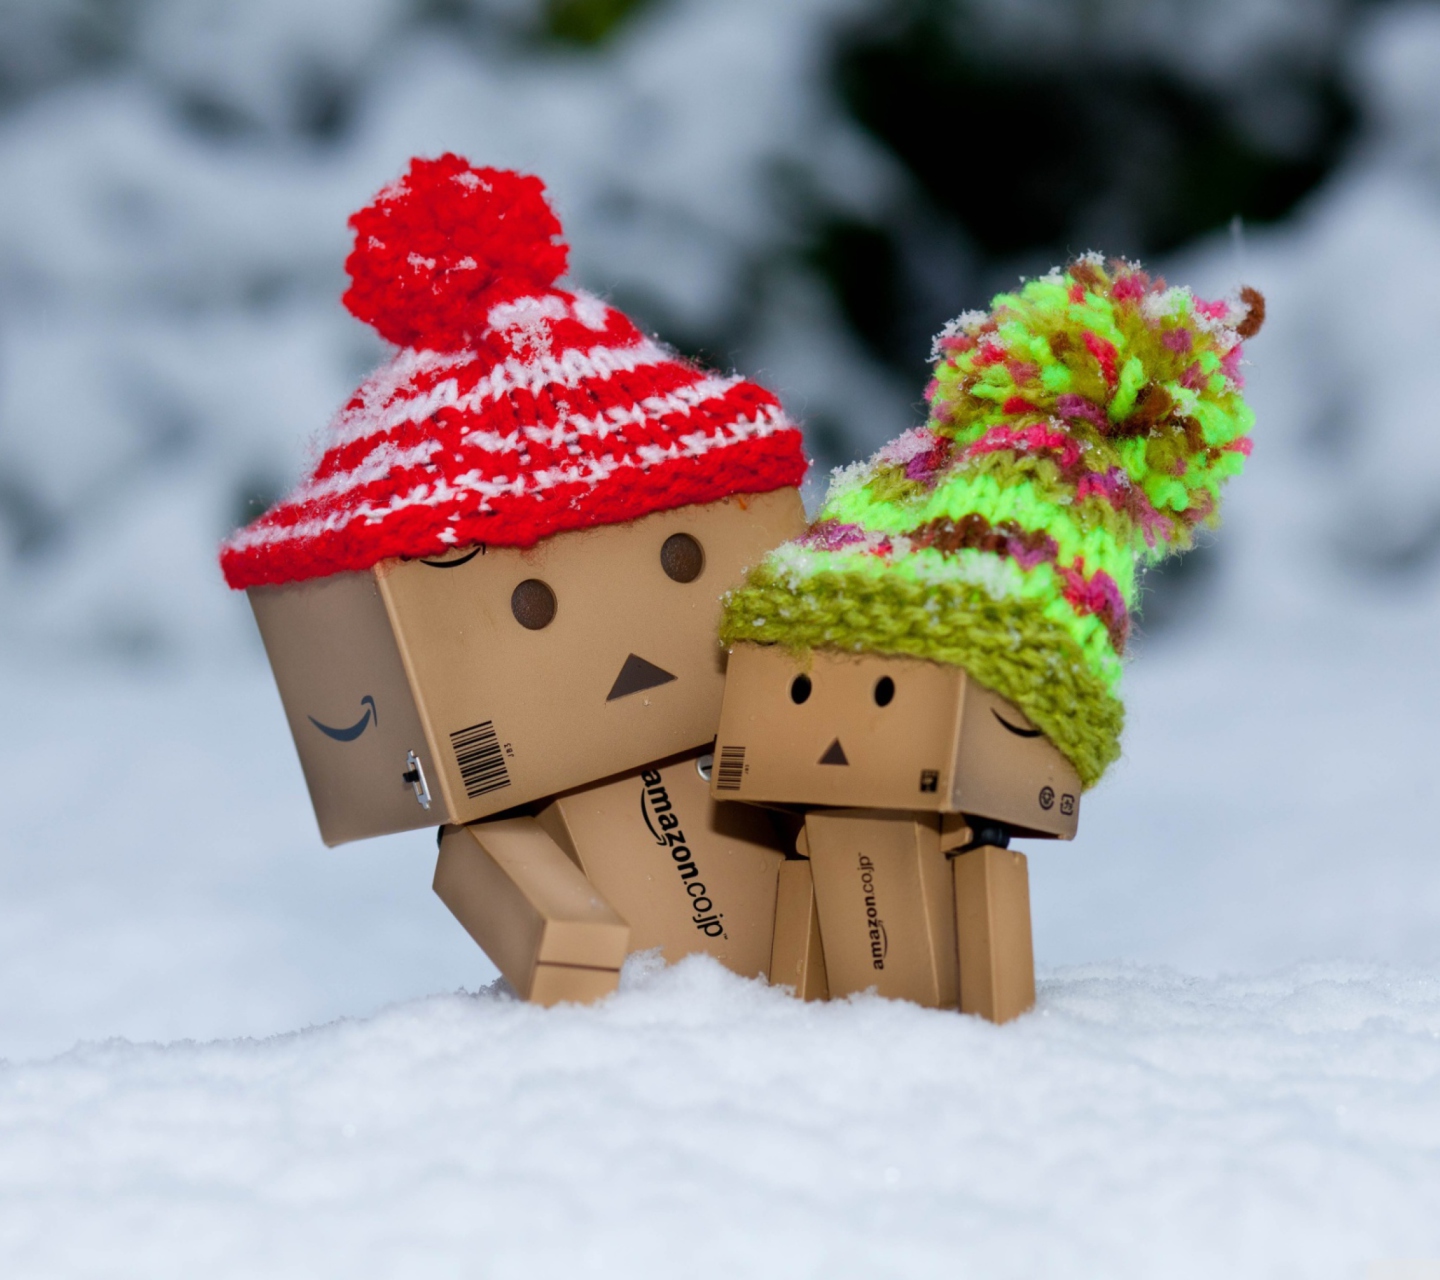 Danbo Is Scared By So Much Snow wallpaper 1440x1280